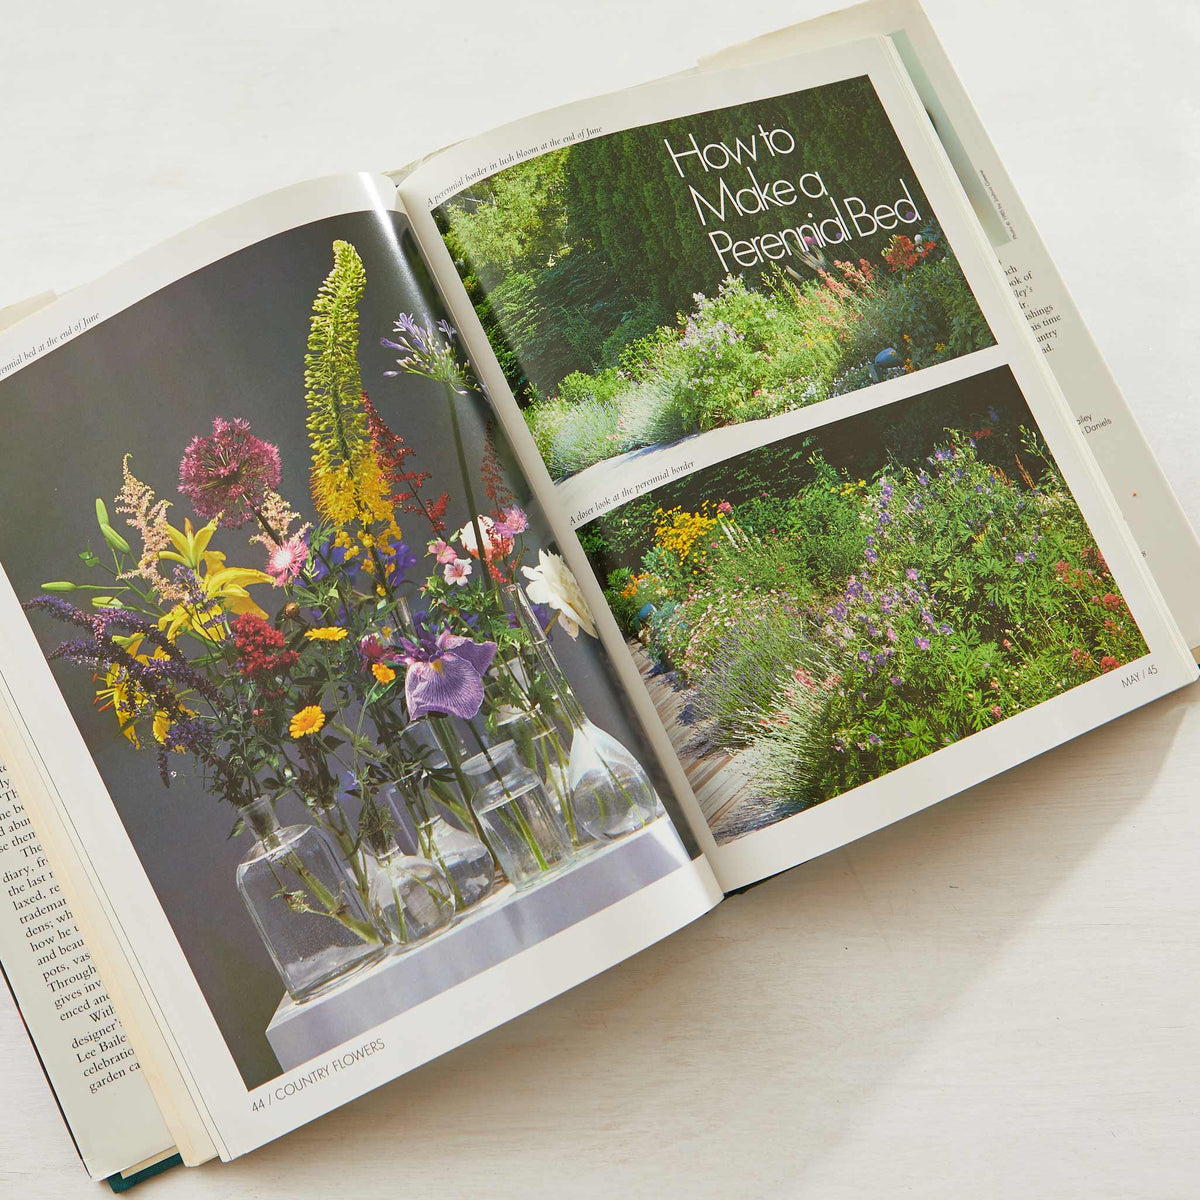 Lee Bailey’s County Flowers. Best flower gardening bible. Covers meadows, perennial beds, flowers to plant in fall and winter. Best gardening guide.